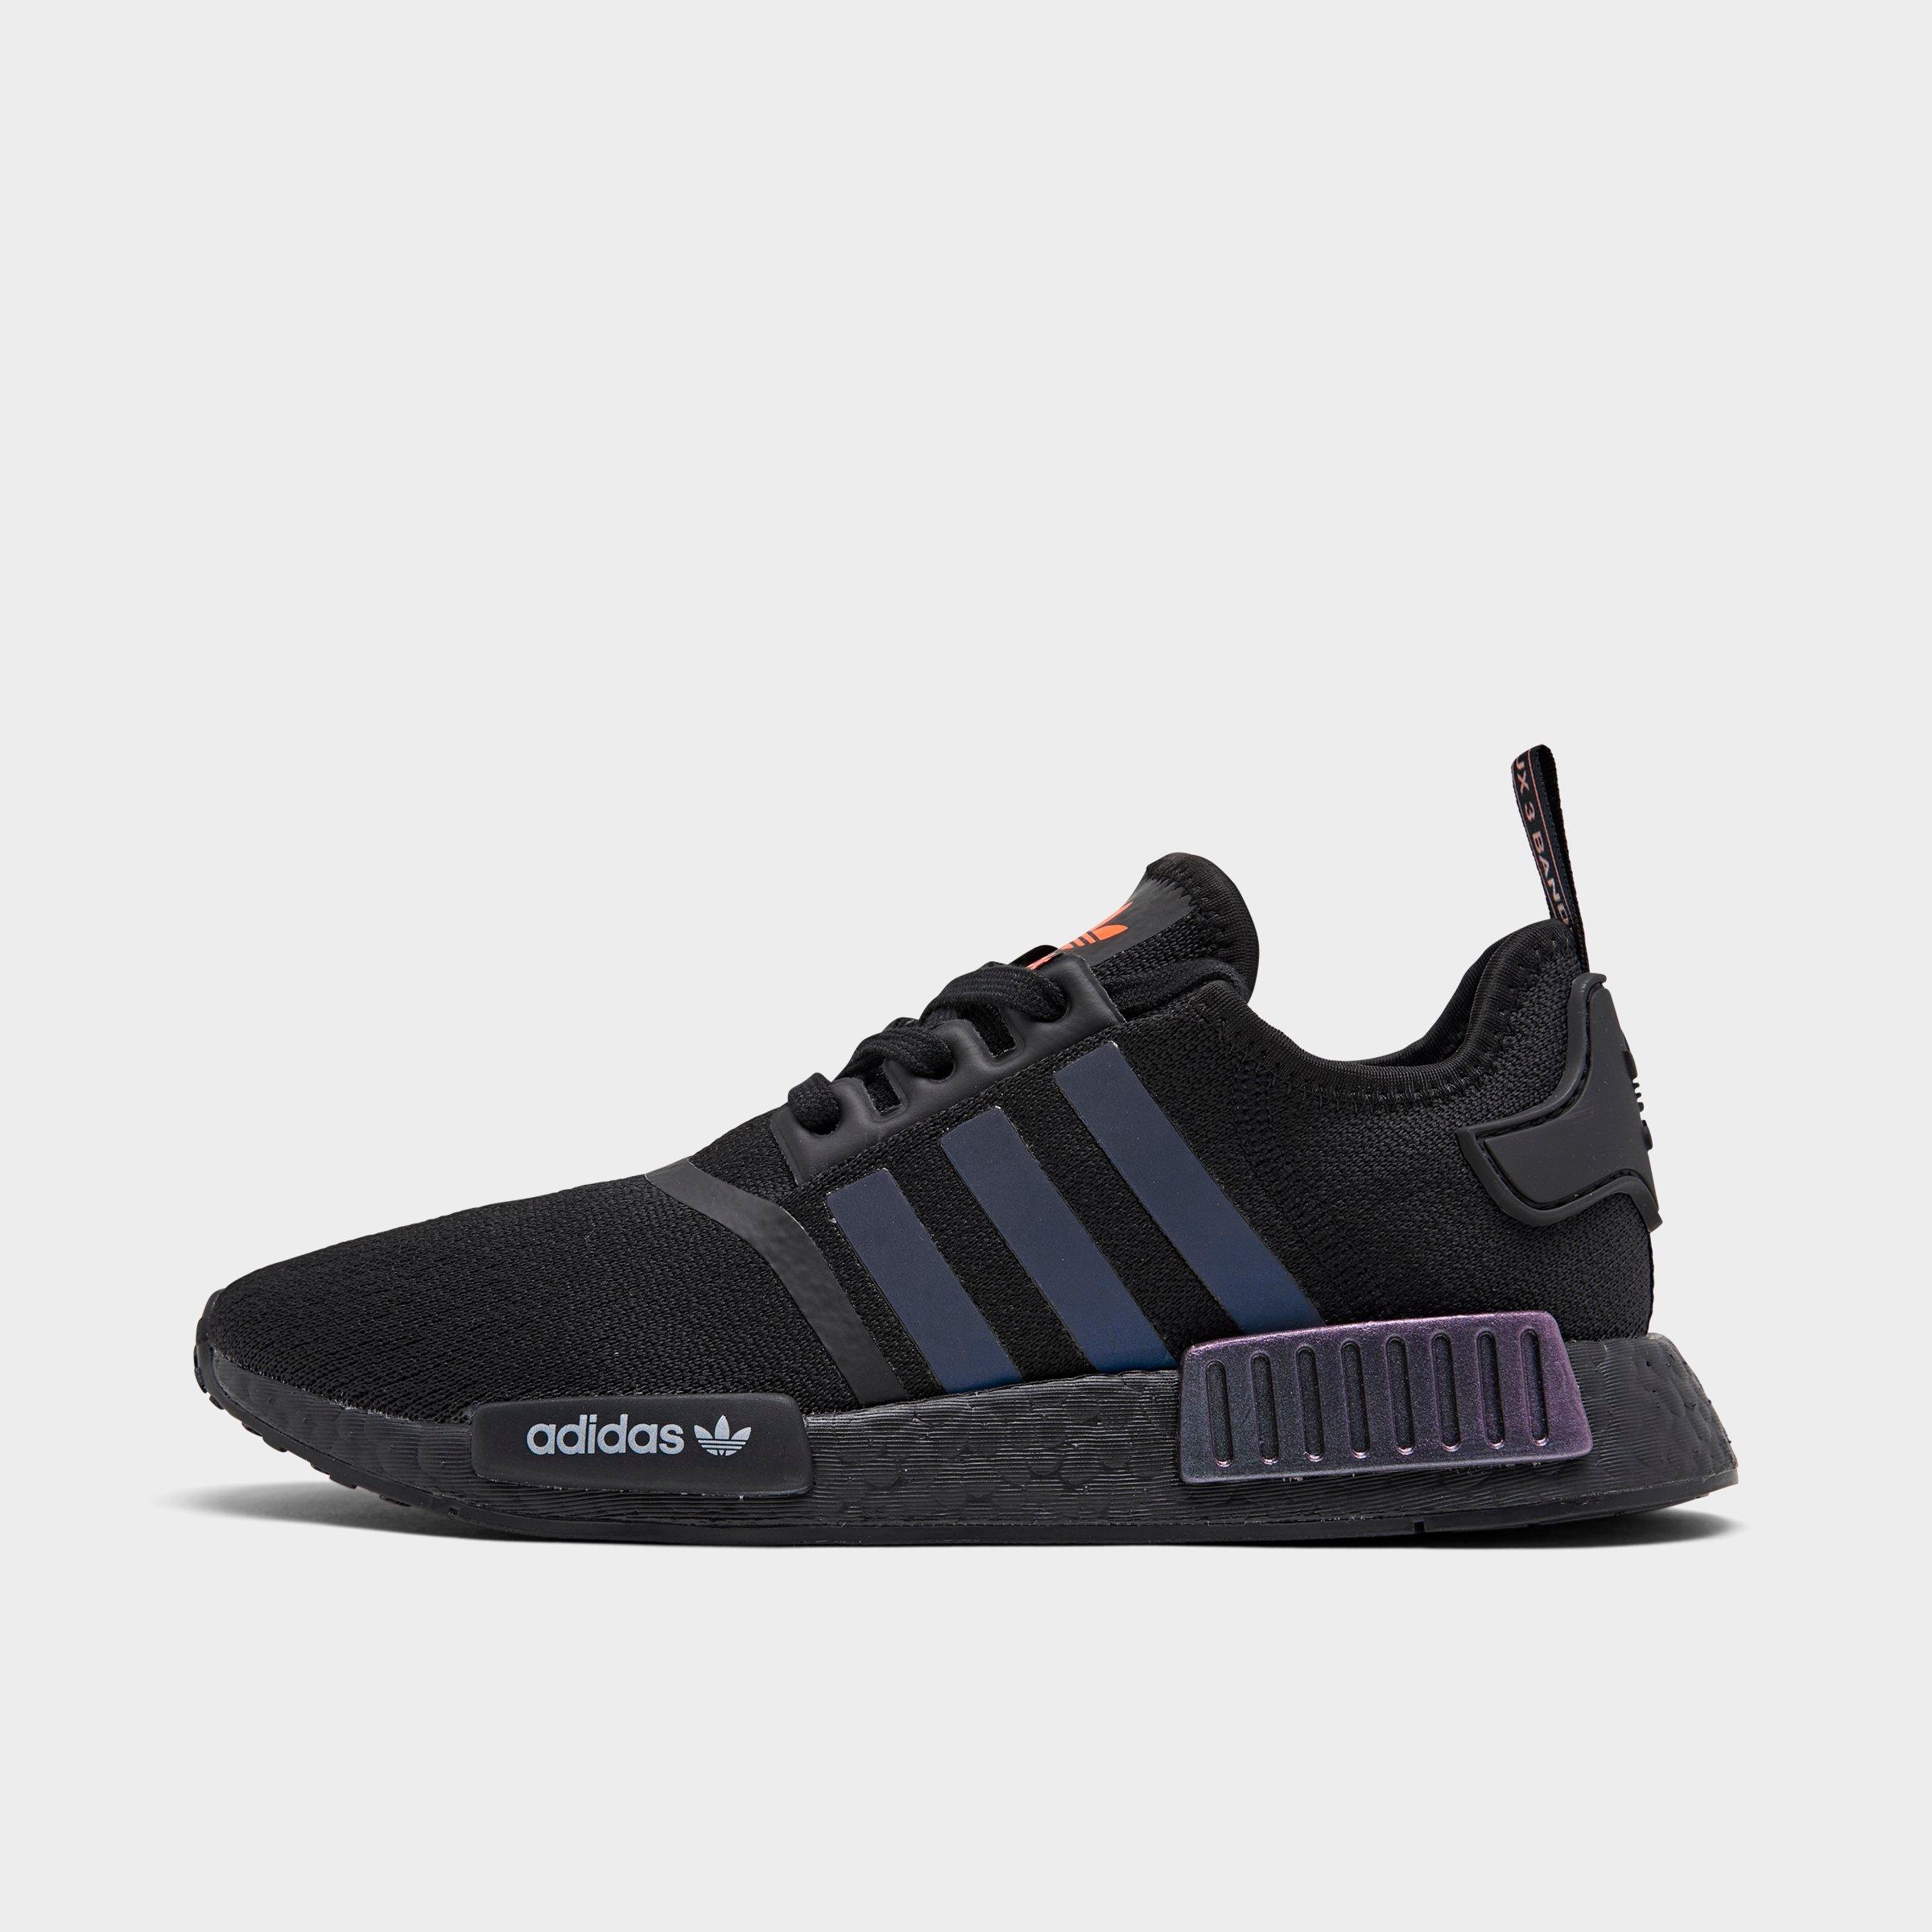 UPC 193106000781 product image for Adidas Men's Originals NMD R1 Casual Shoes in Black Size 10.0 | upcitemdb.com